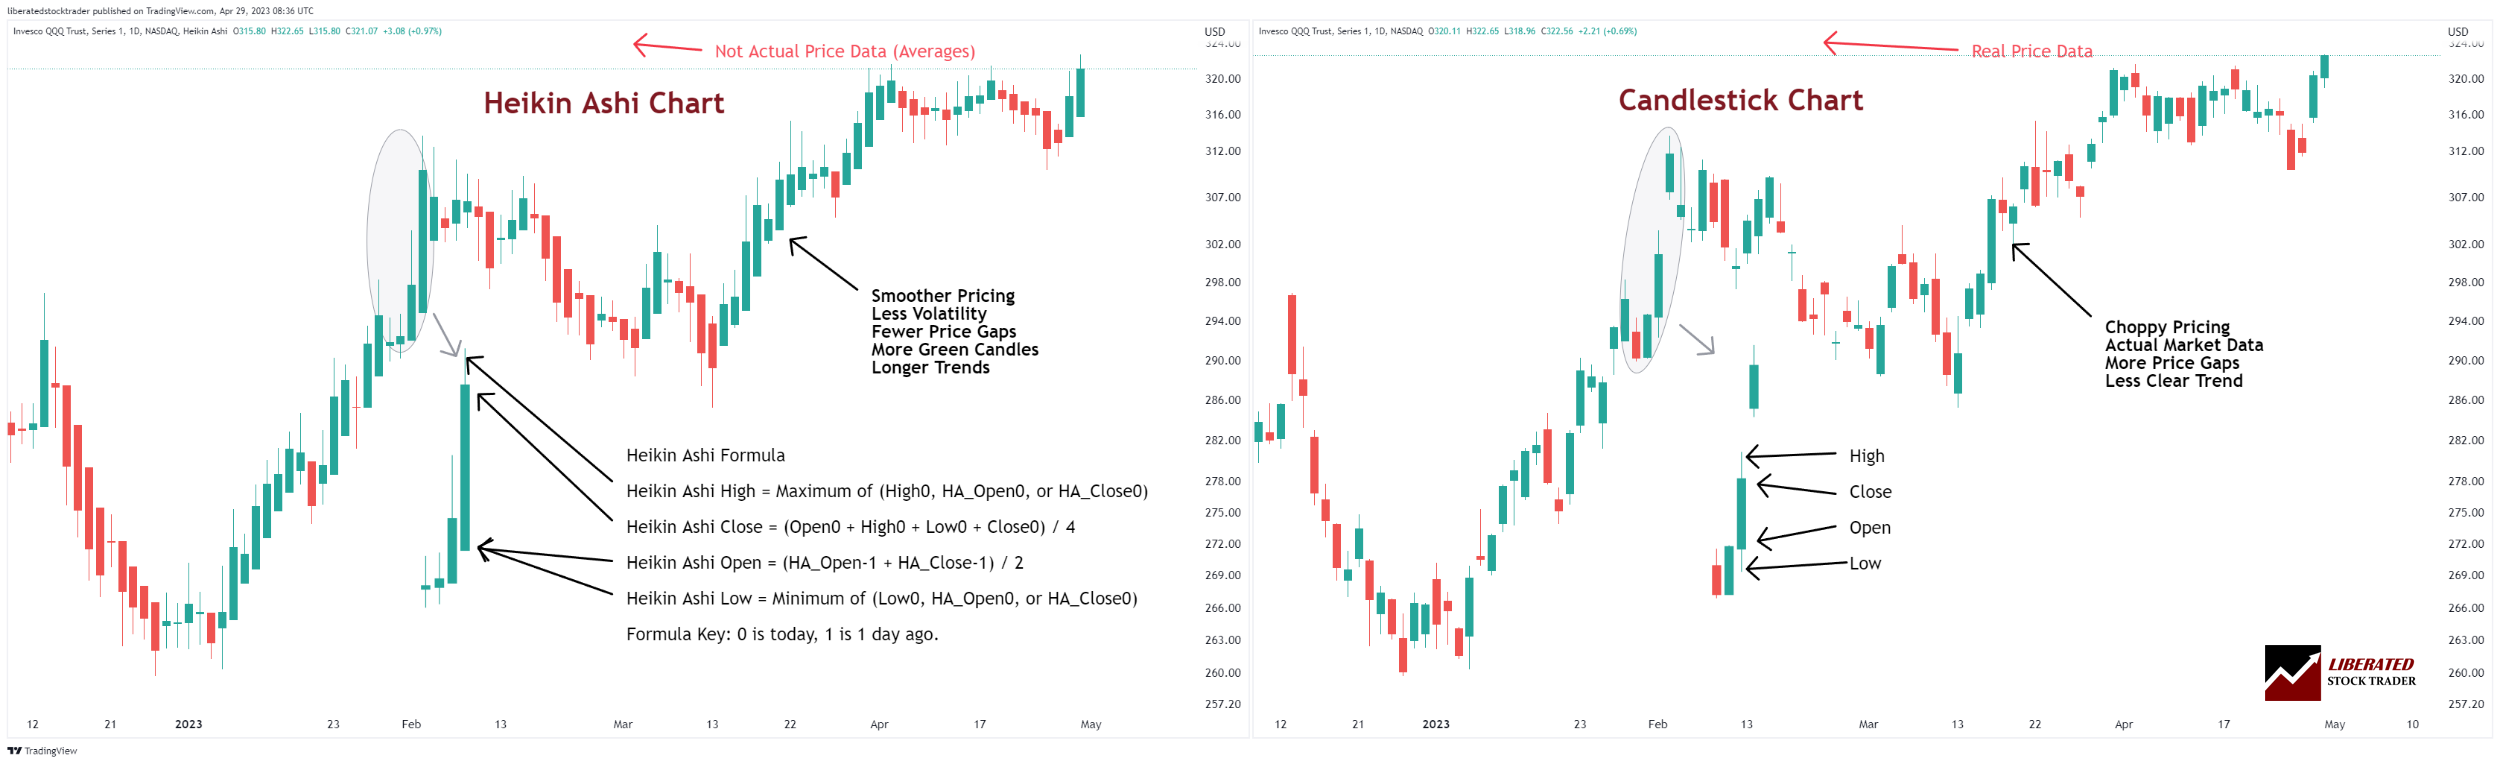 Heikin Ashi vs. Traditional Candlestick Charts: The Key Differences